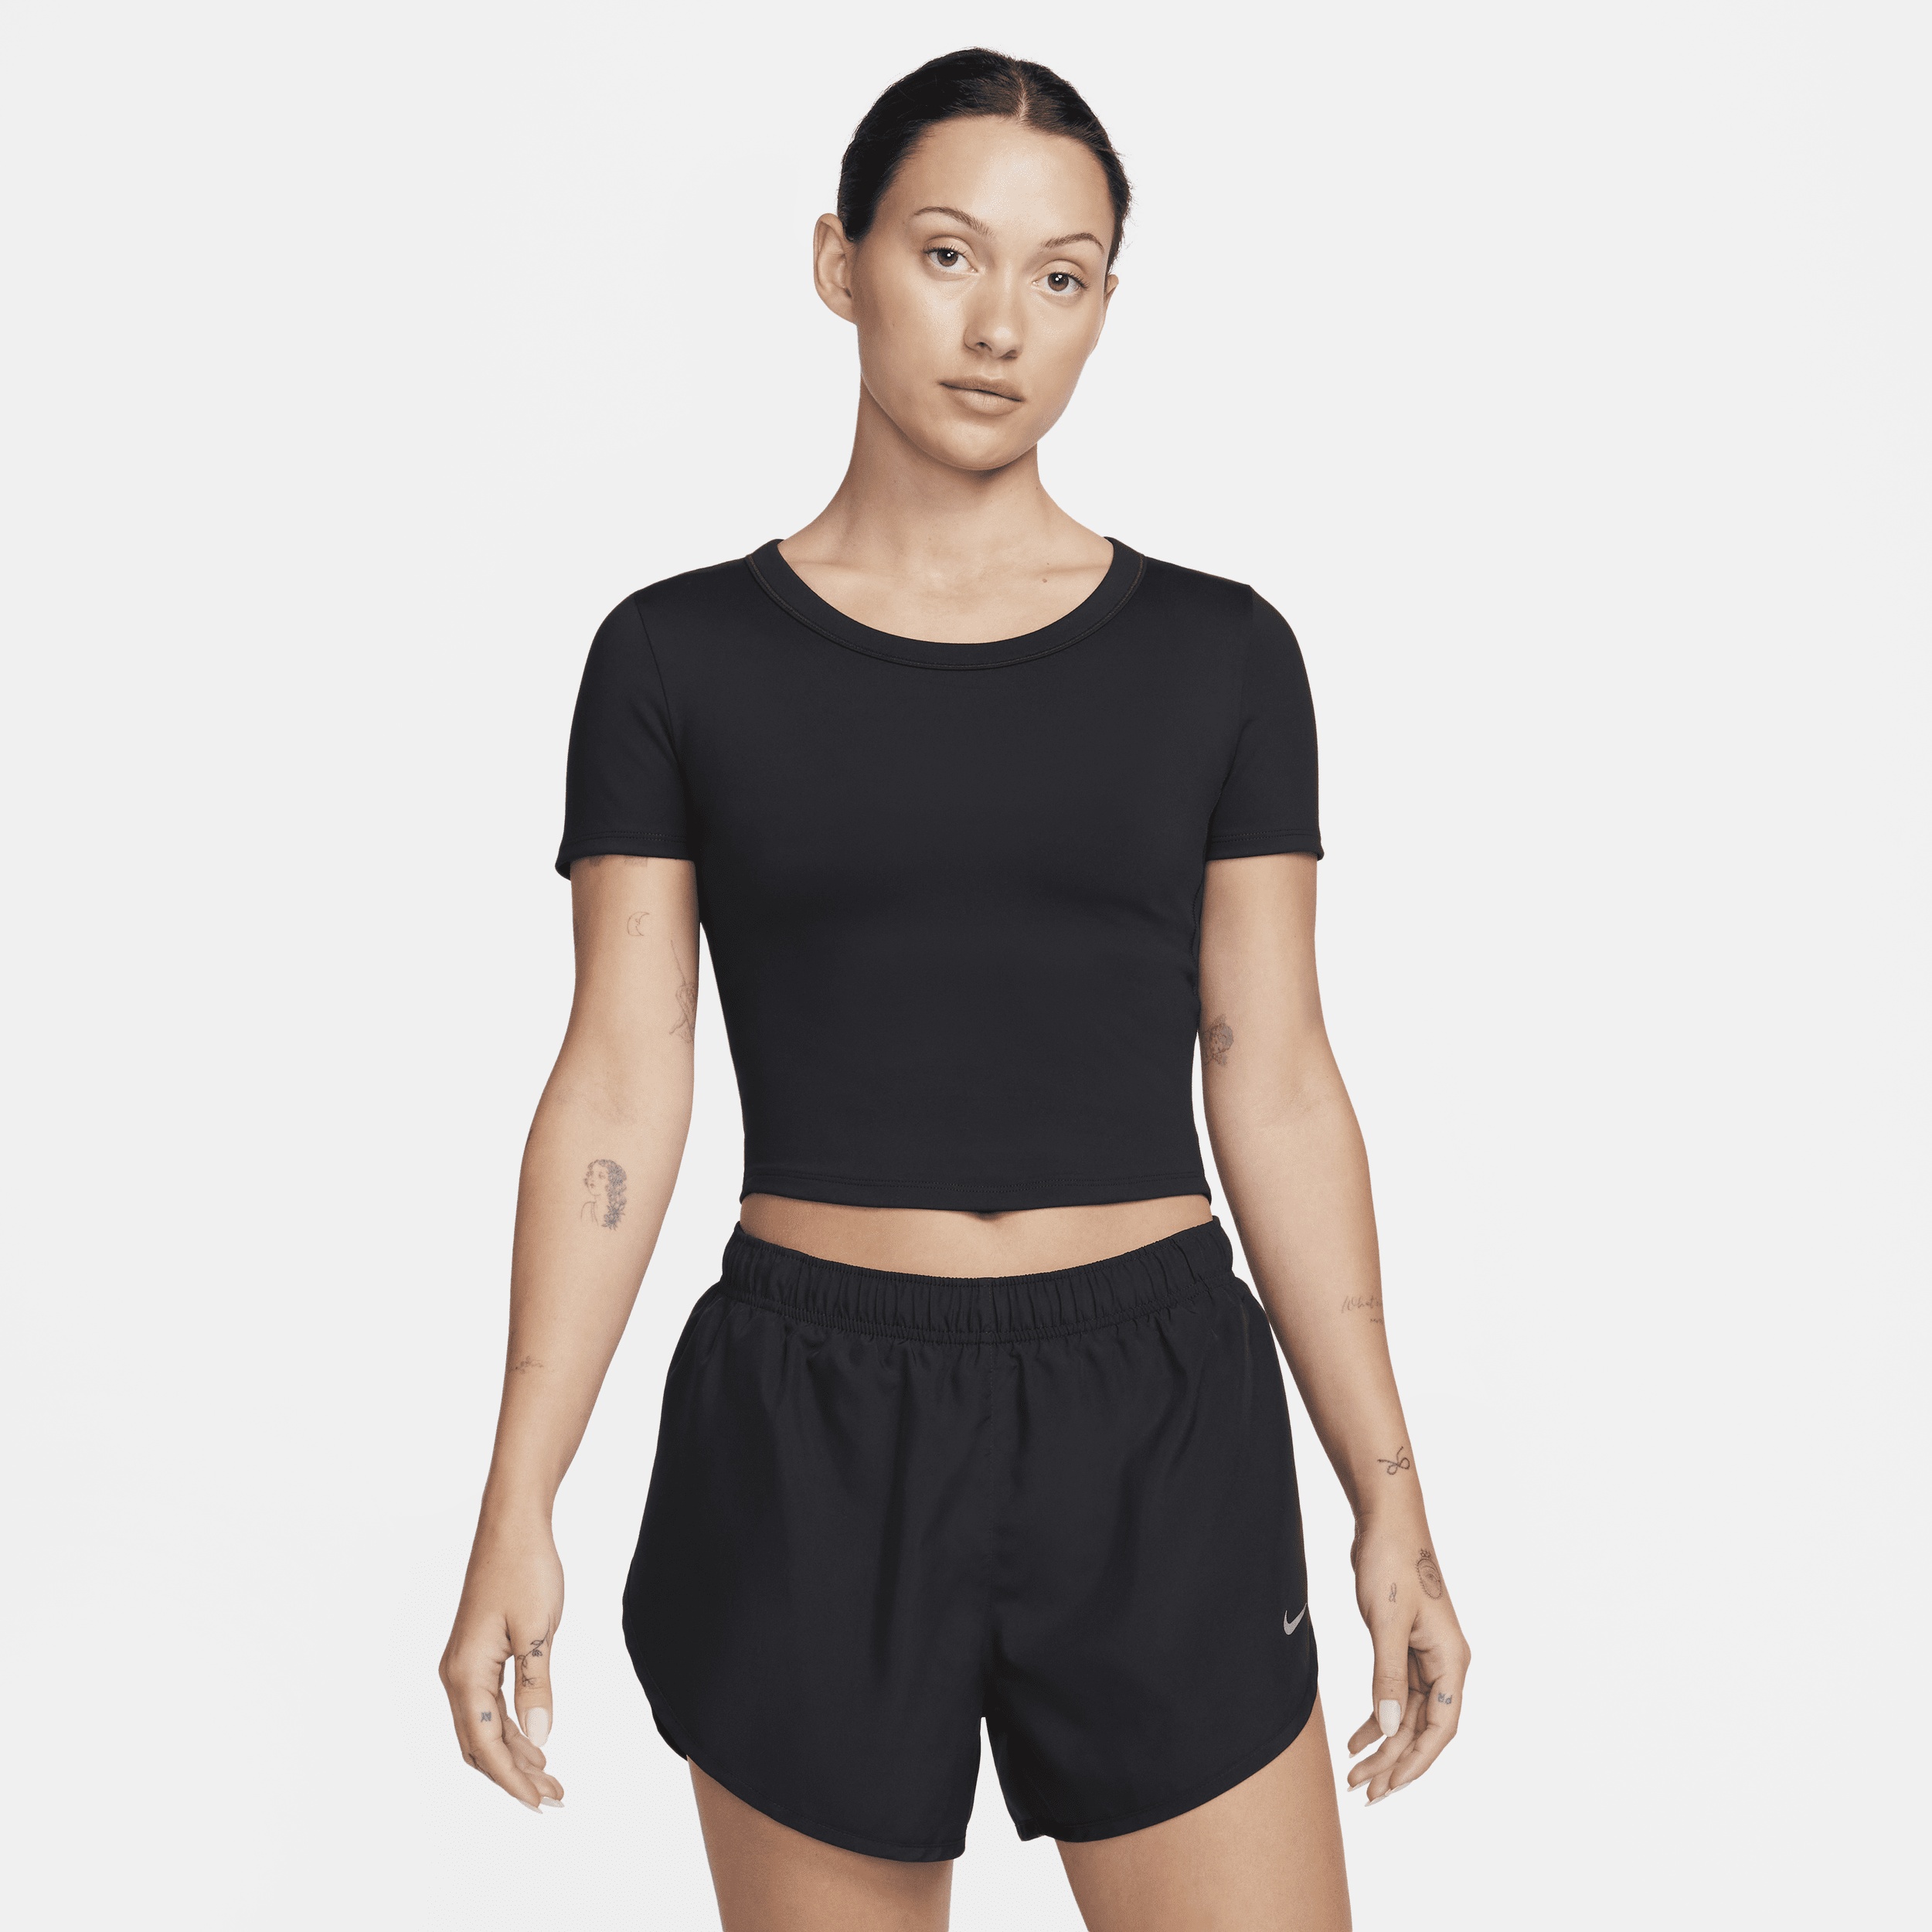 Nike Women's One Fitted Dri-FIT Short-Sleeve Cropped Top - 1